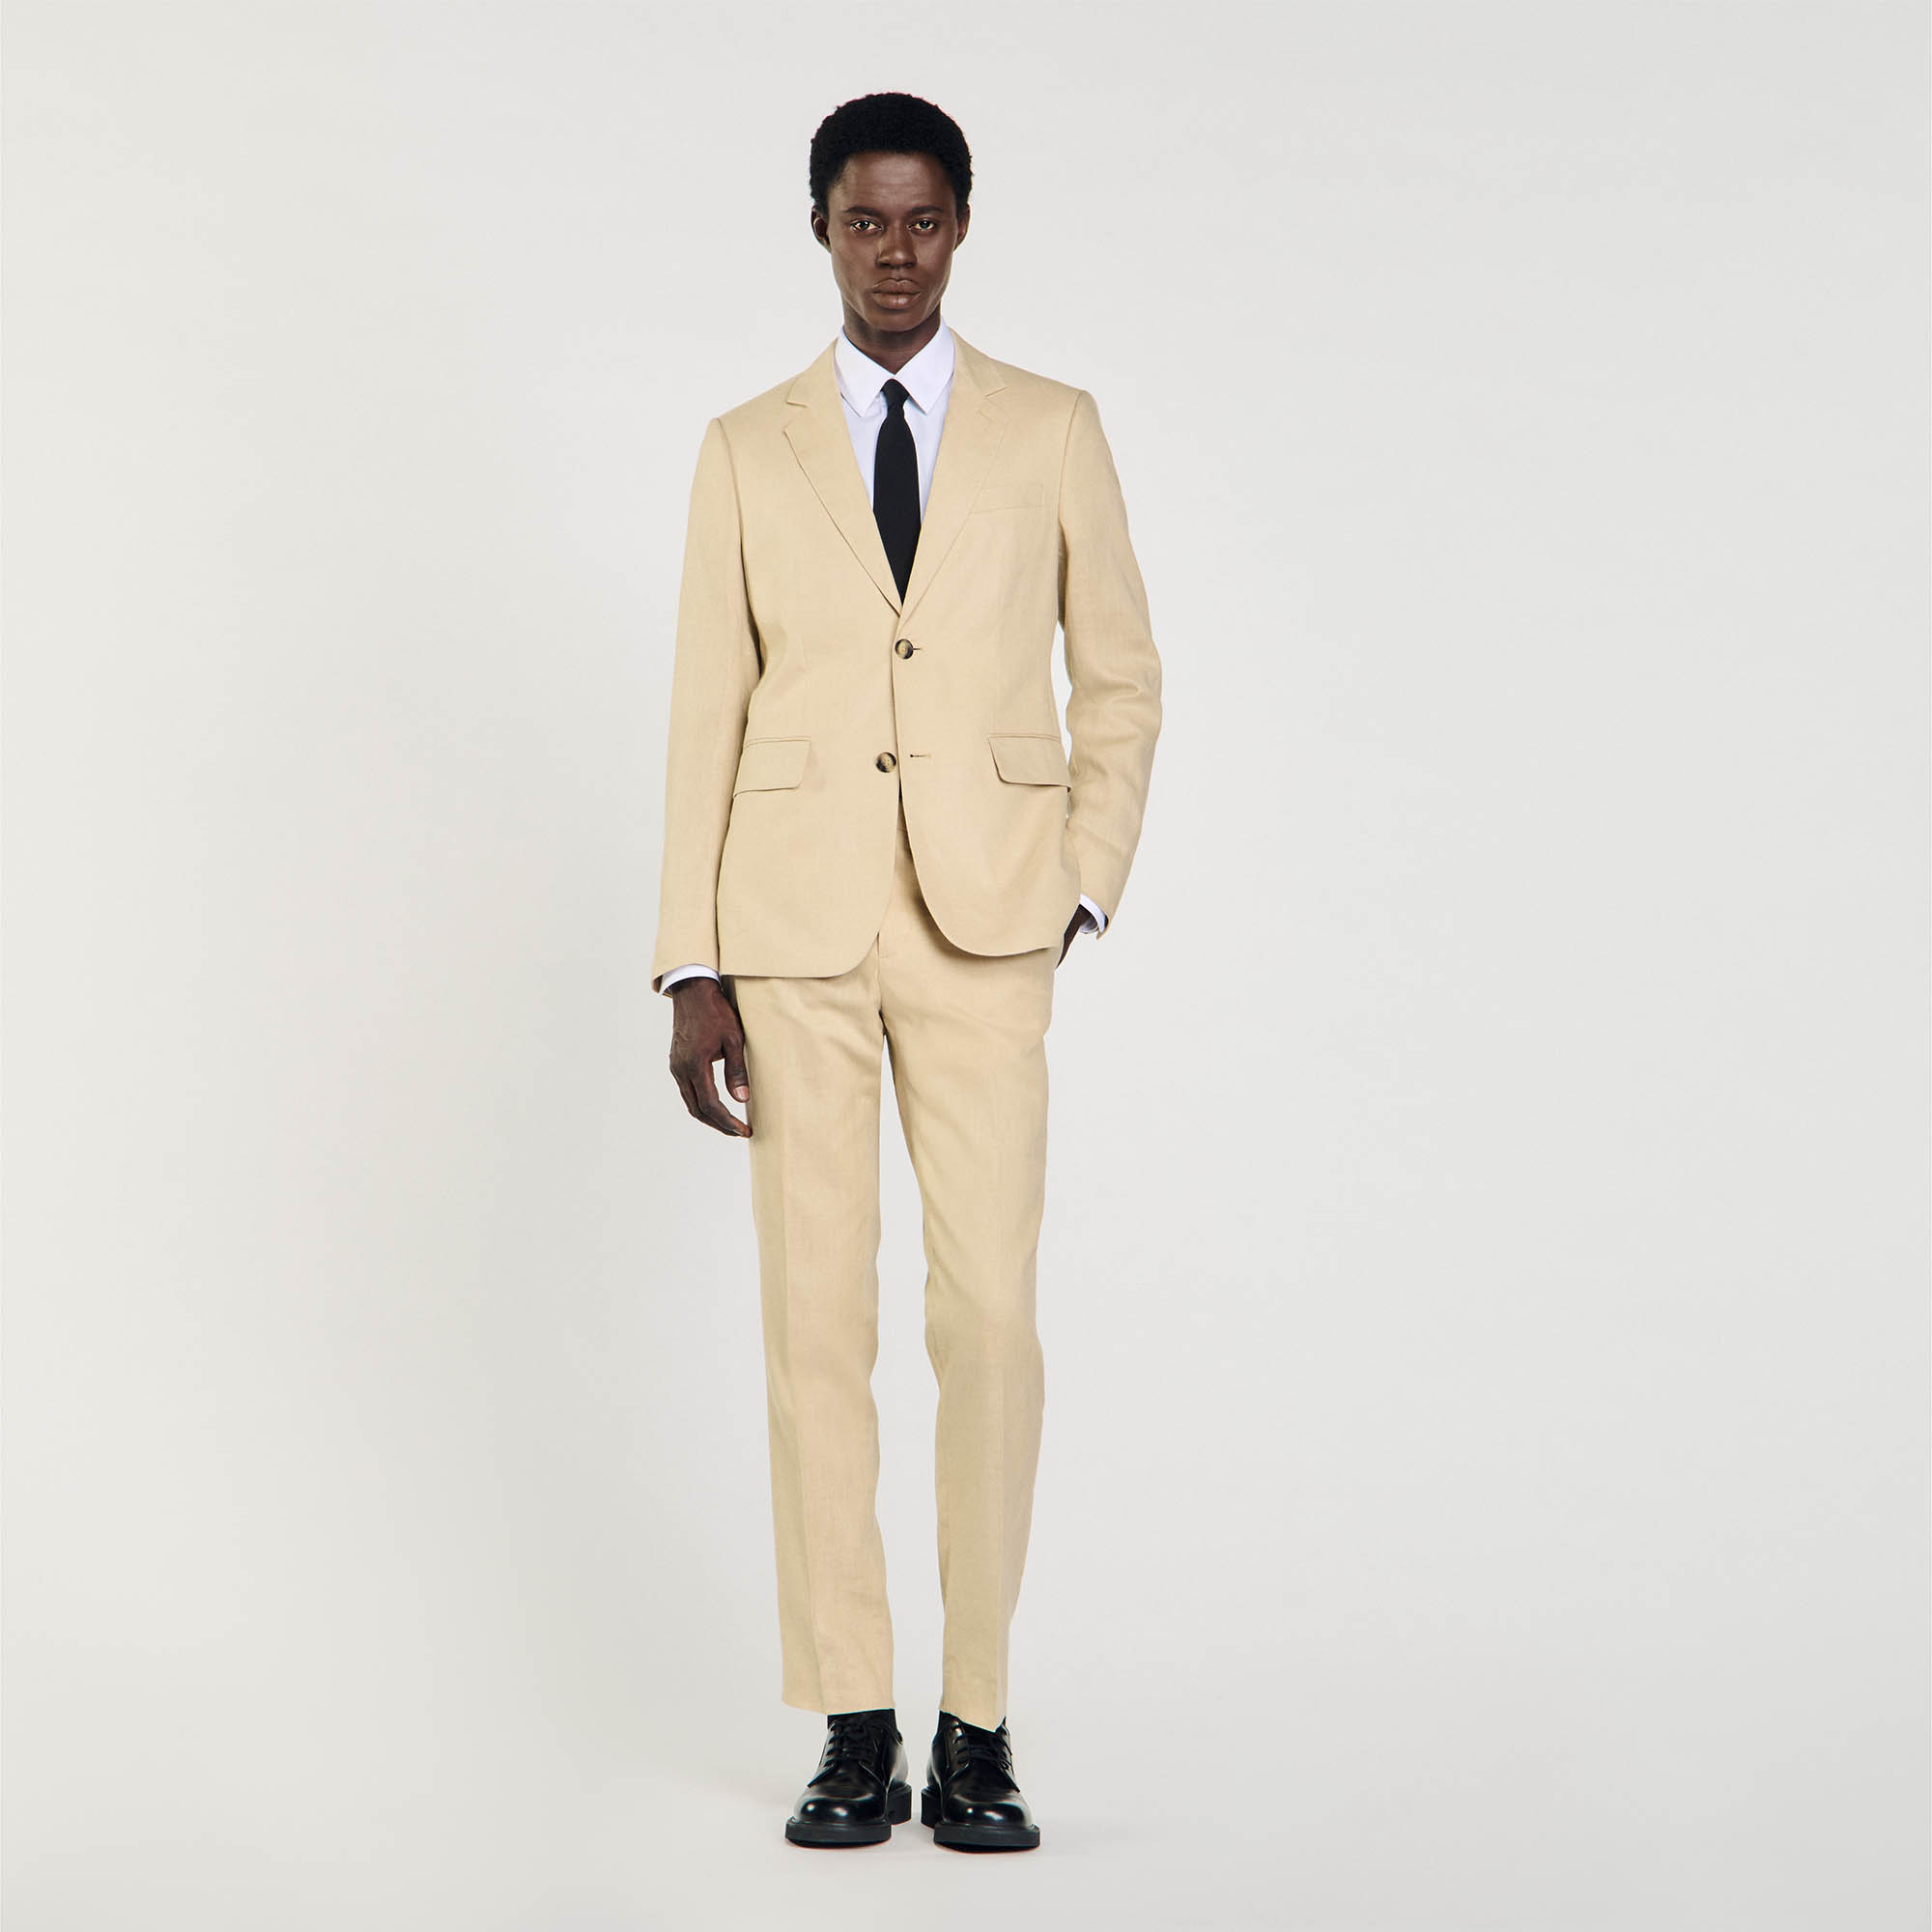 Sandro linen Body lining: Linen suit jacket with a classic cut, a back vent, long sleeves with buttoned cuffs, a two-button fastening, and flap pockets